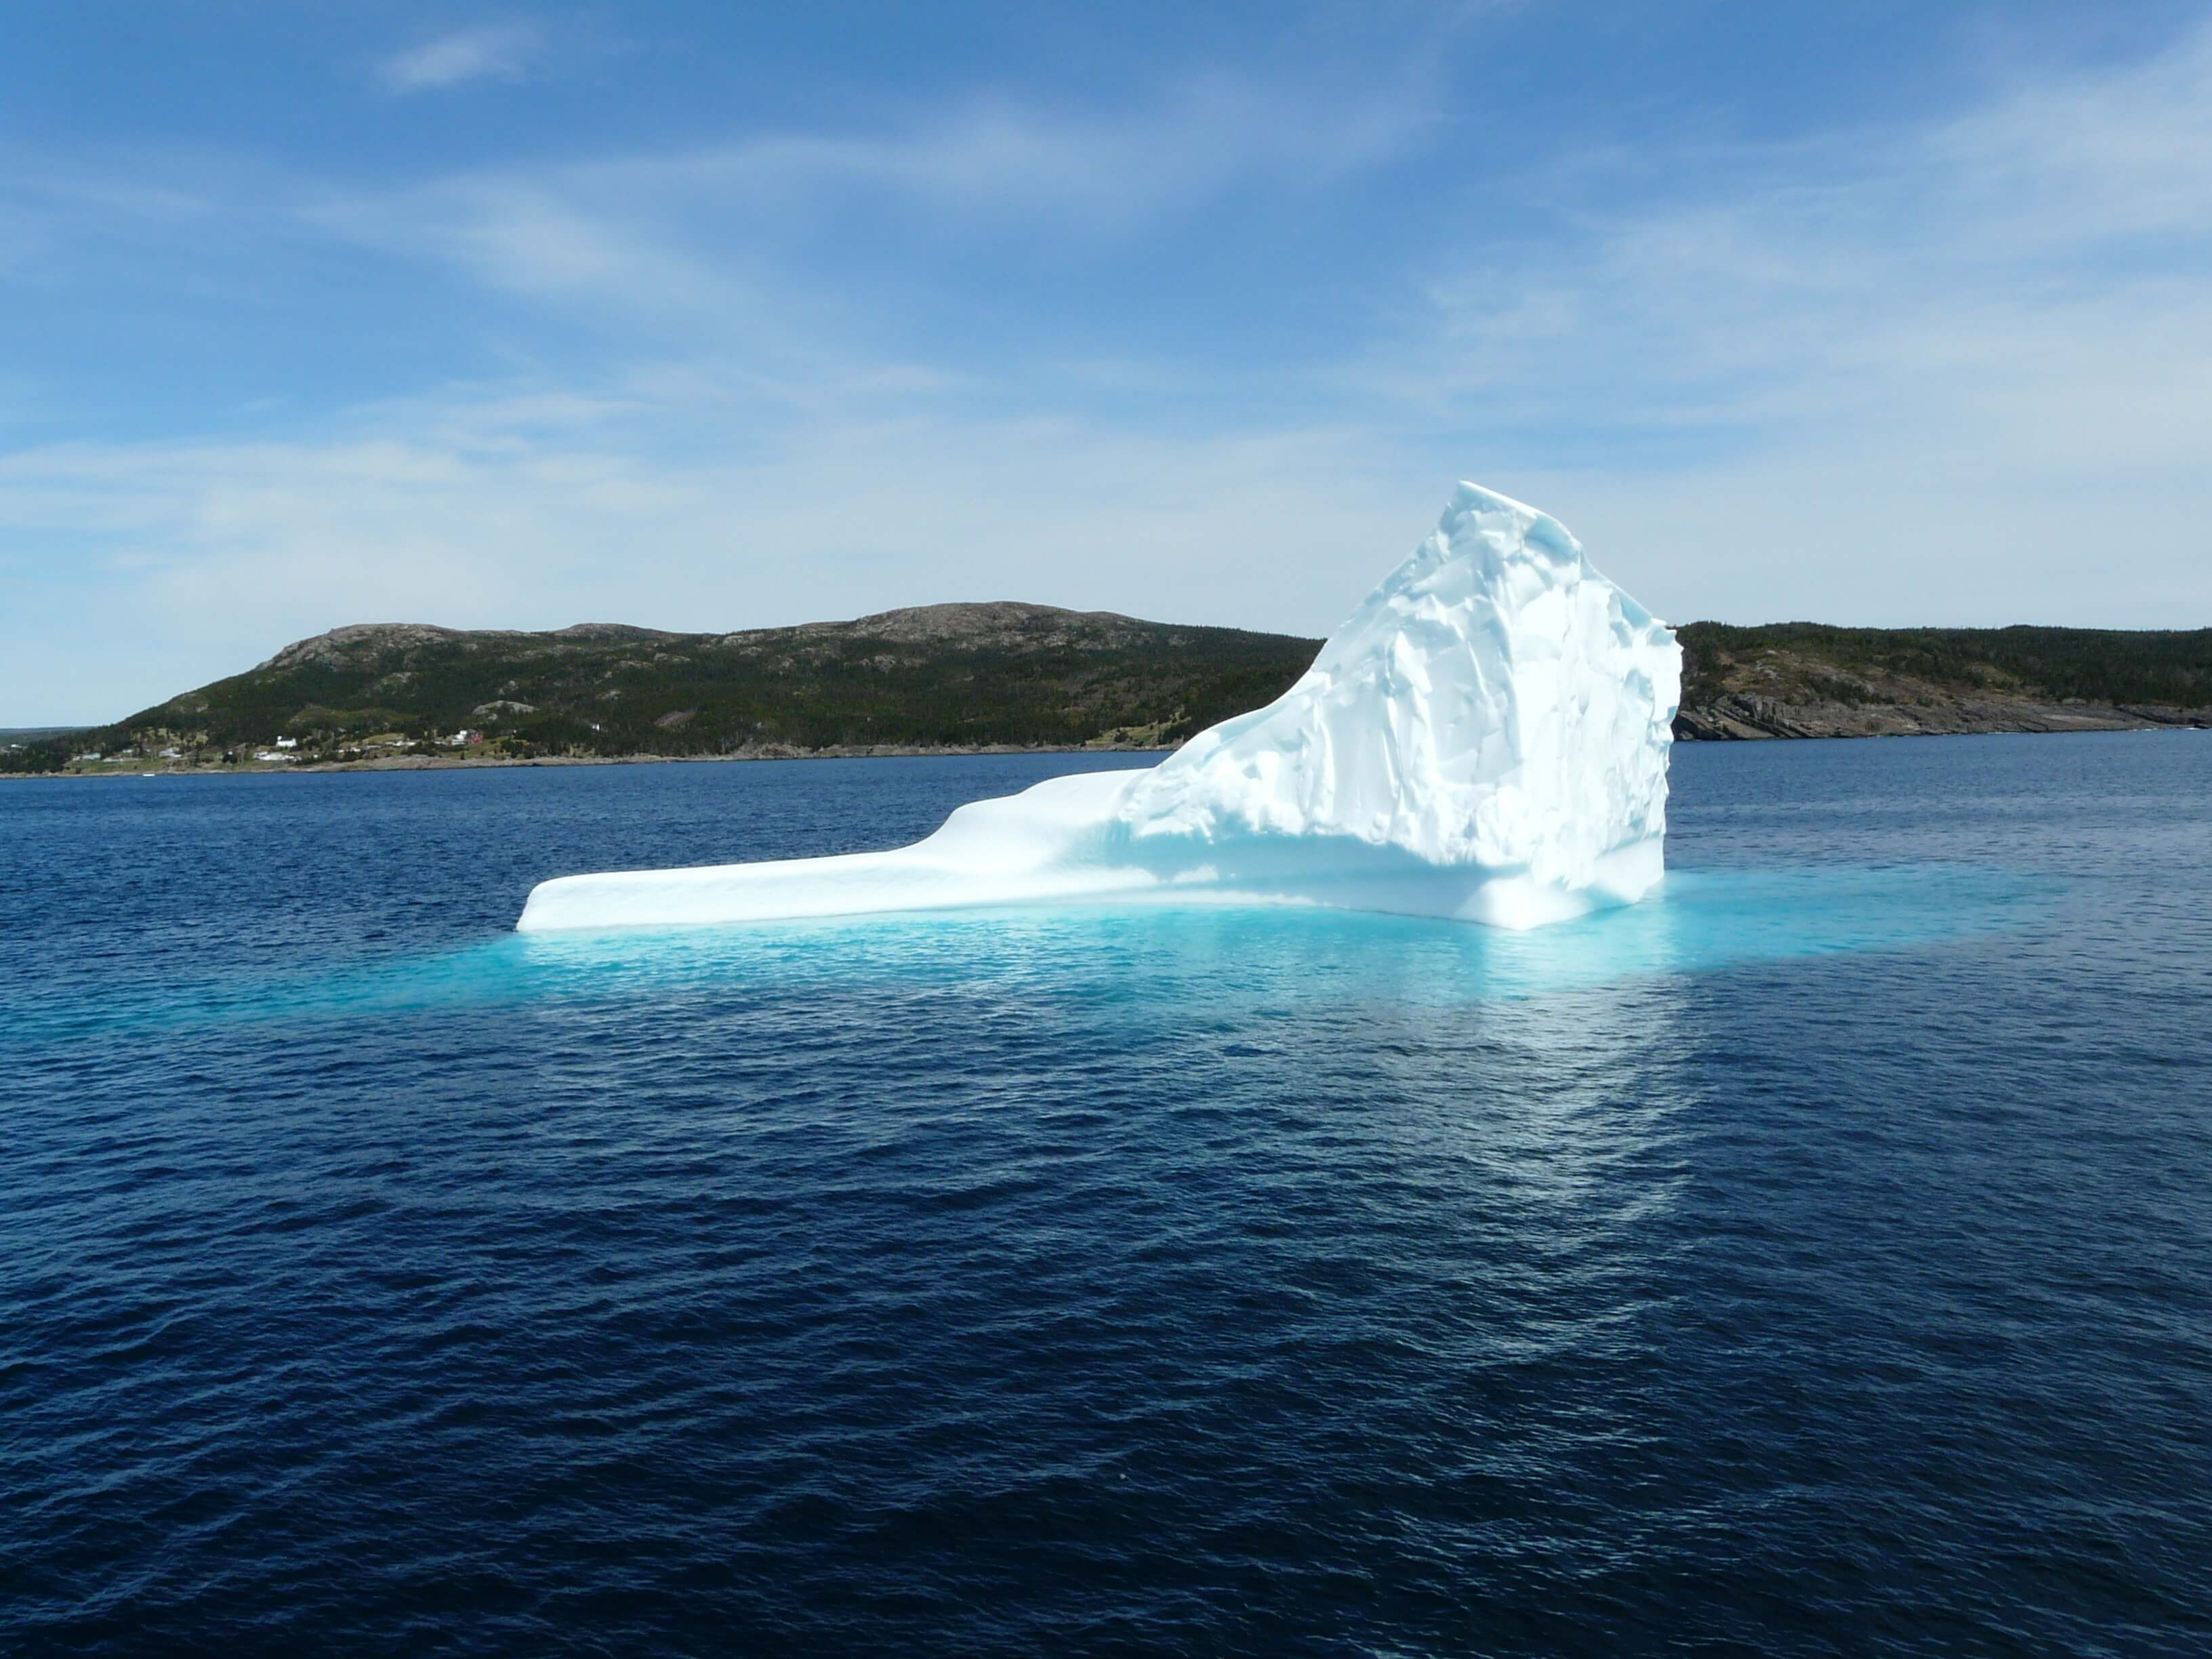 Iceberg tours in Newfoundland – Gatherall's Puffin and Whale Watch